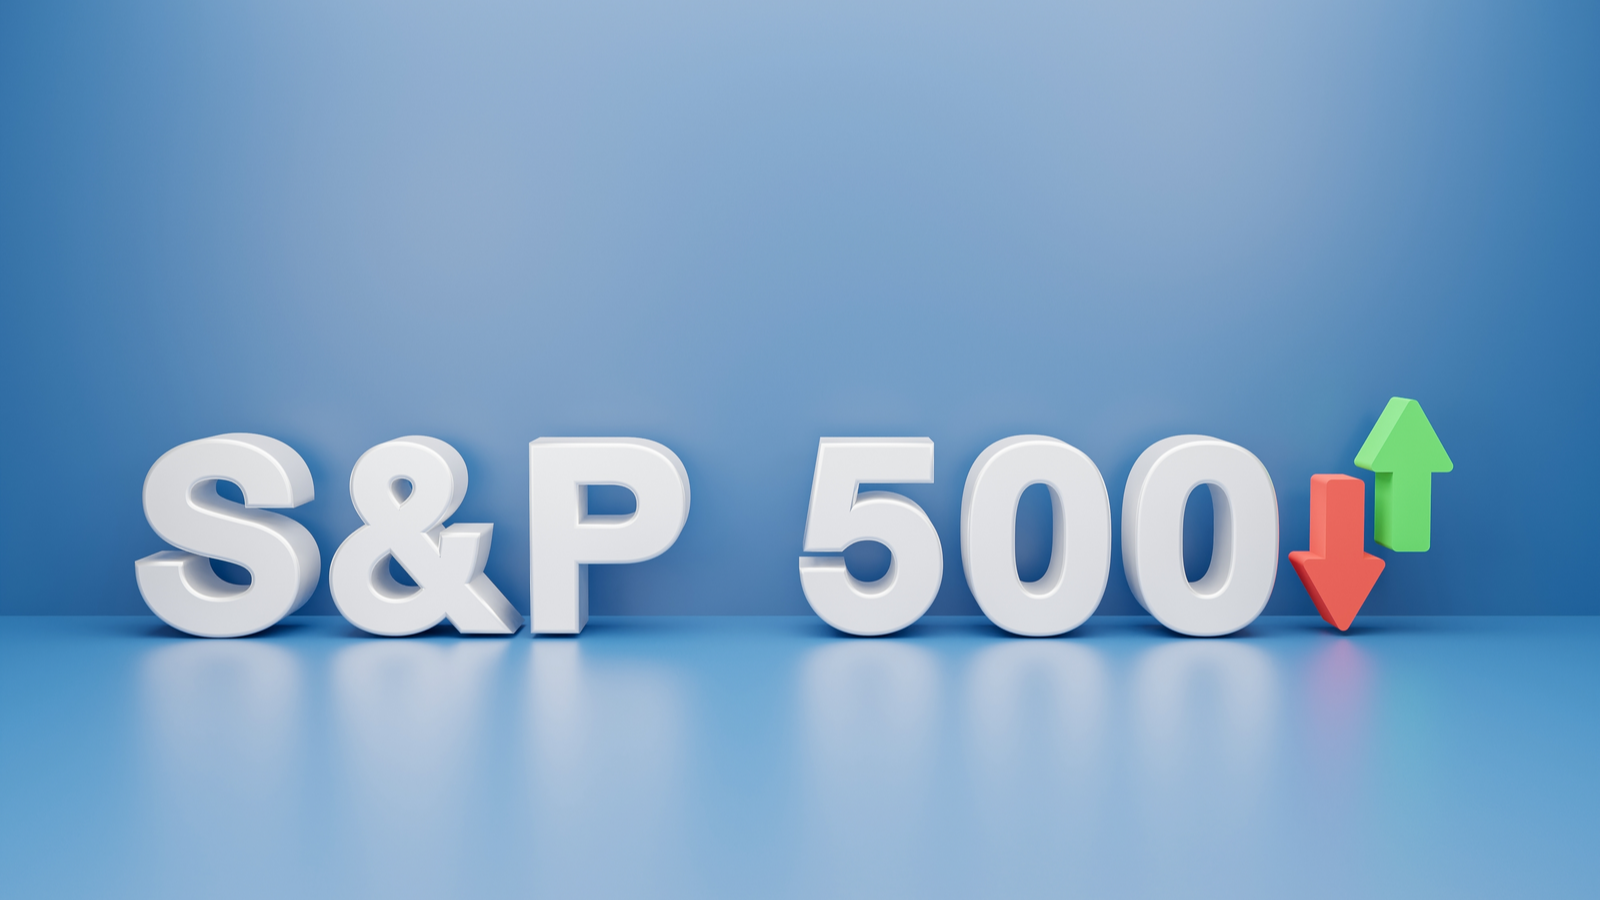 S&P 500 block letters displayed on a light blue background. SPY stock.